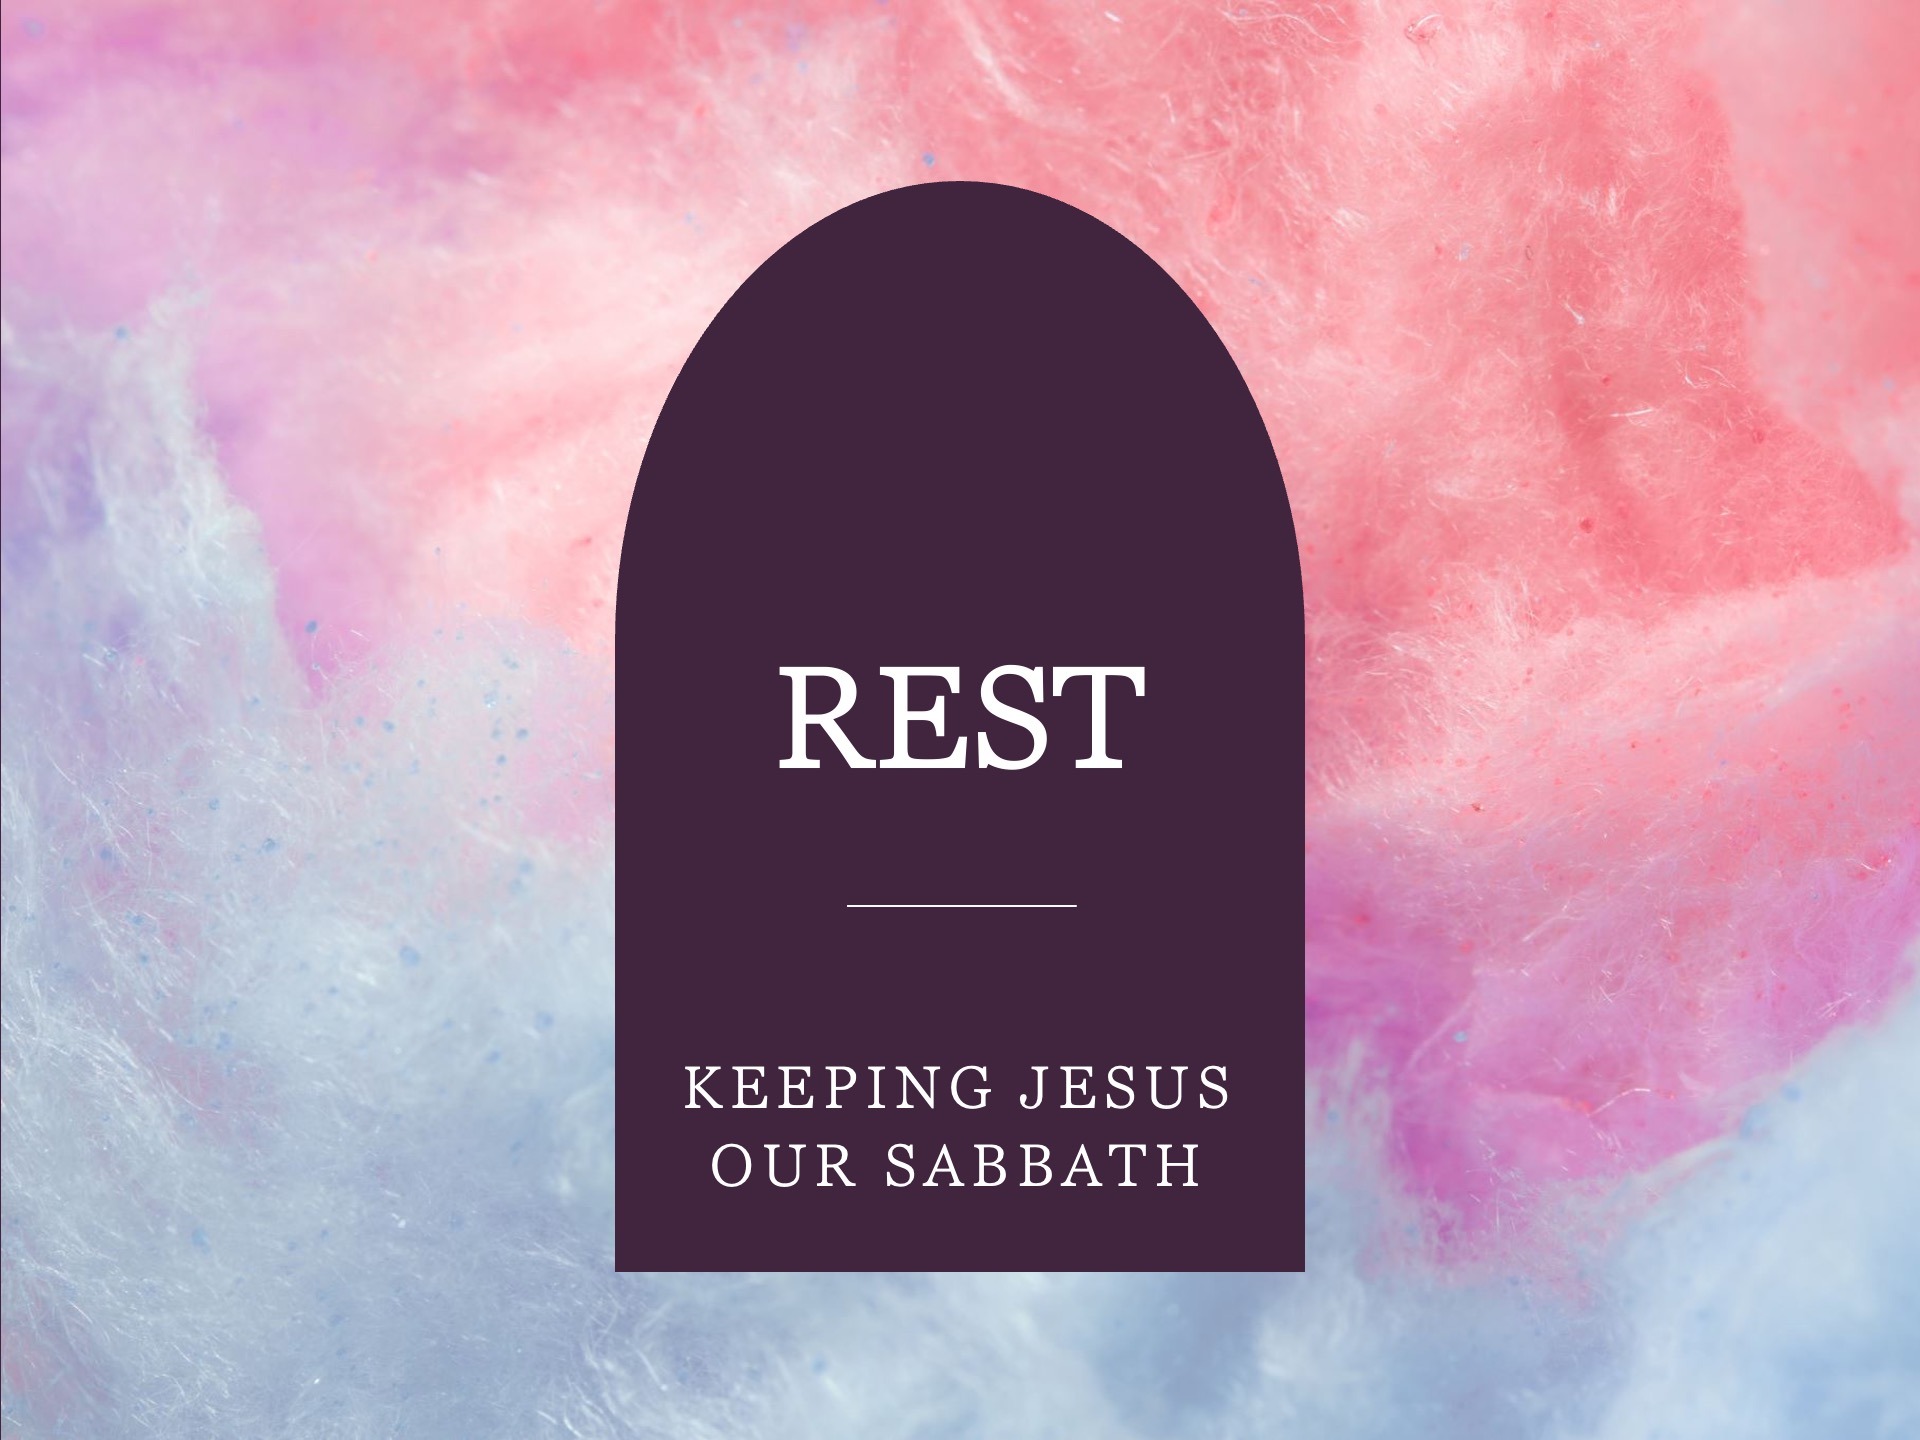 Resurrection: The Work that Leads to Rest